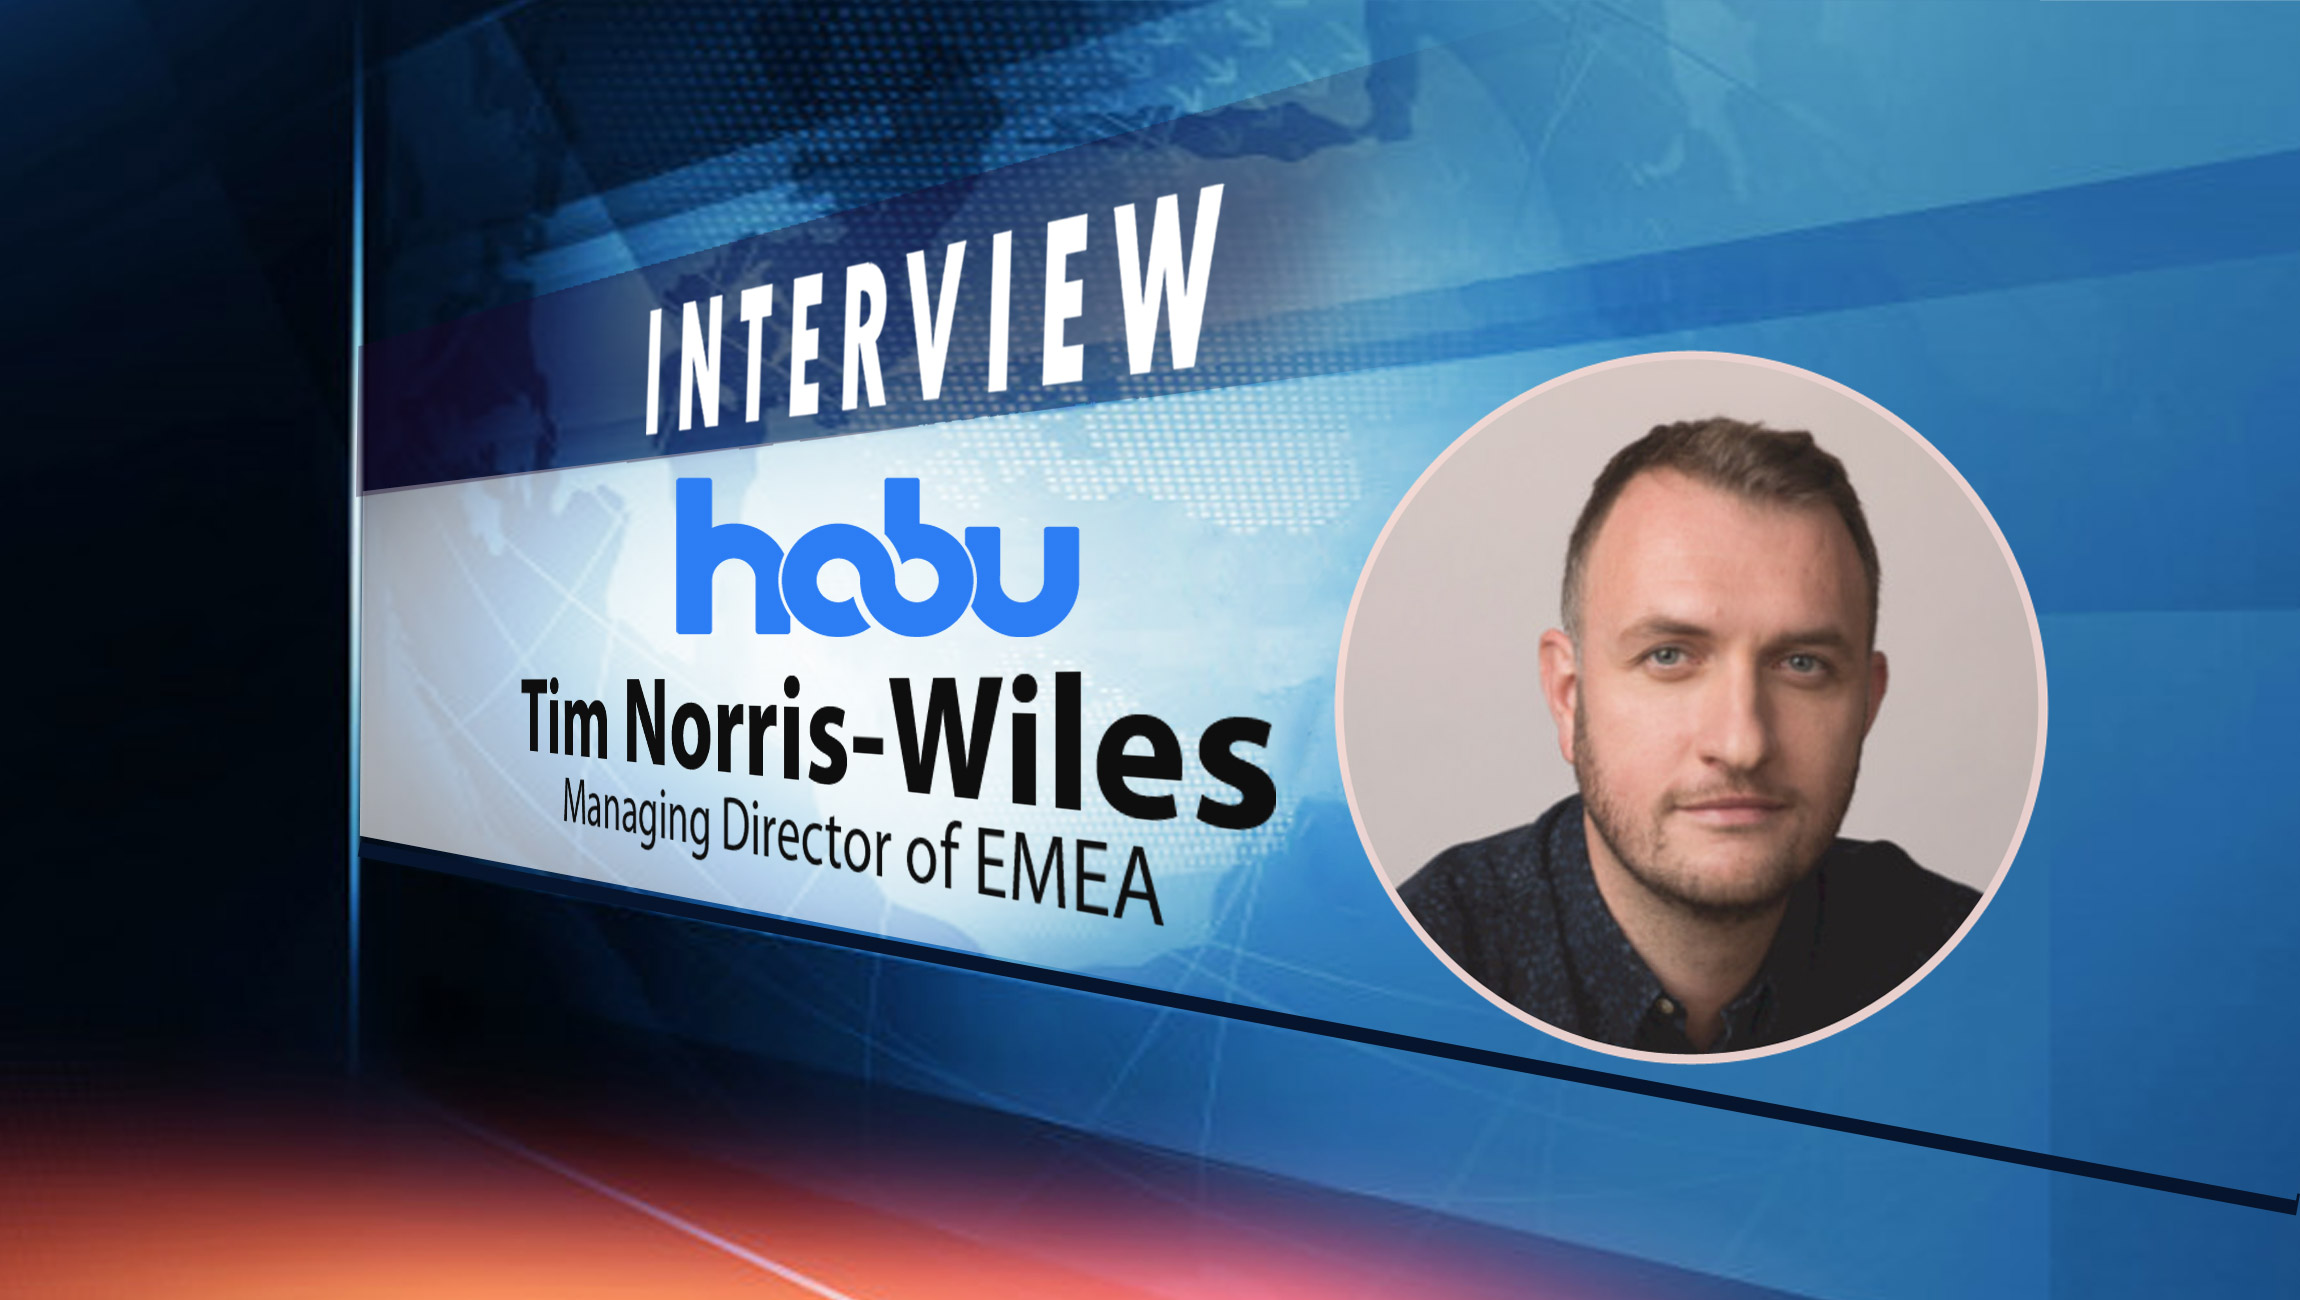 SalesTechStar Interview with Tim Norris-Wiles, Managing Director of EMEA at Habu